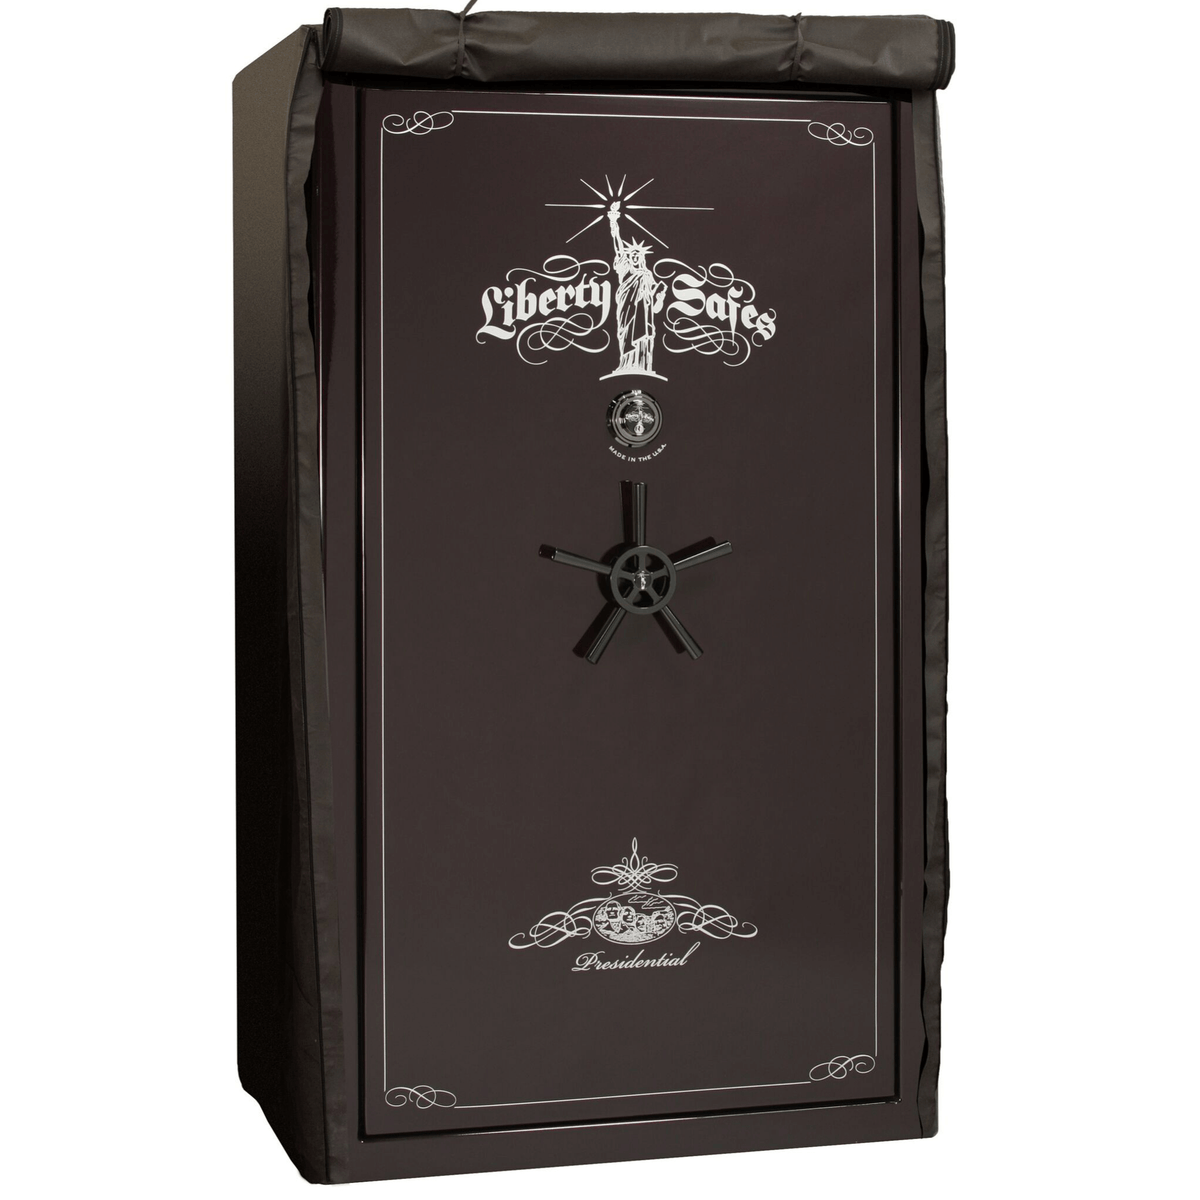 Accessory - Security - Safe Cover - 50 size safes | Liberty Safe Norcal.